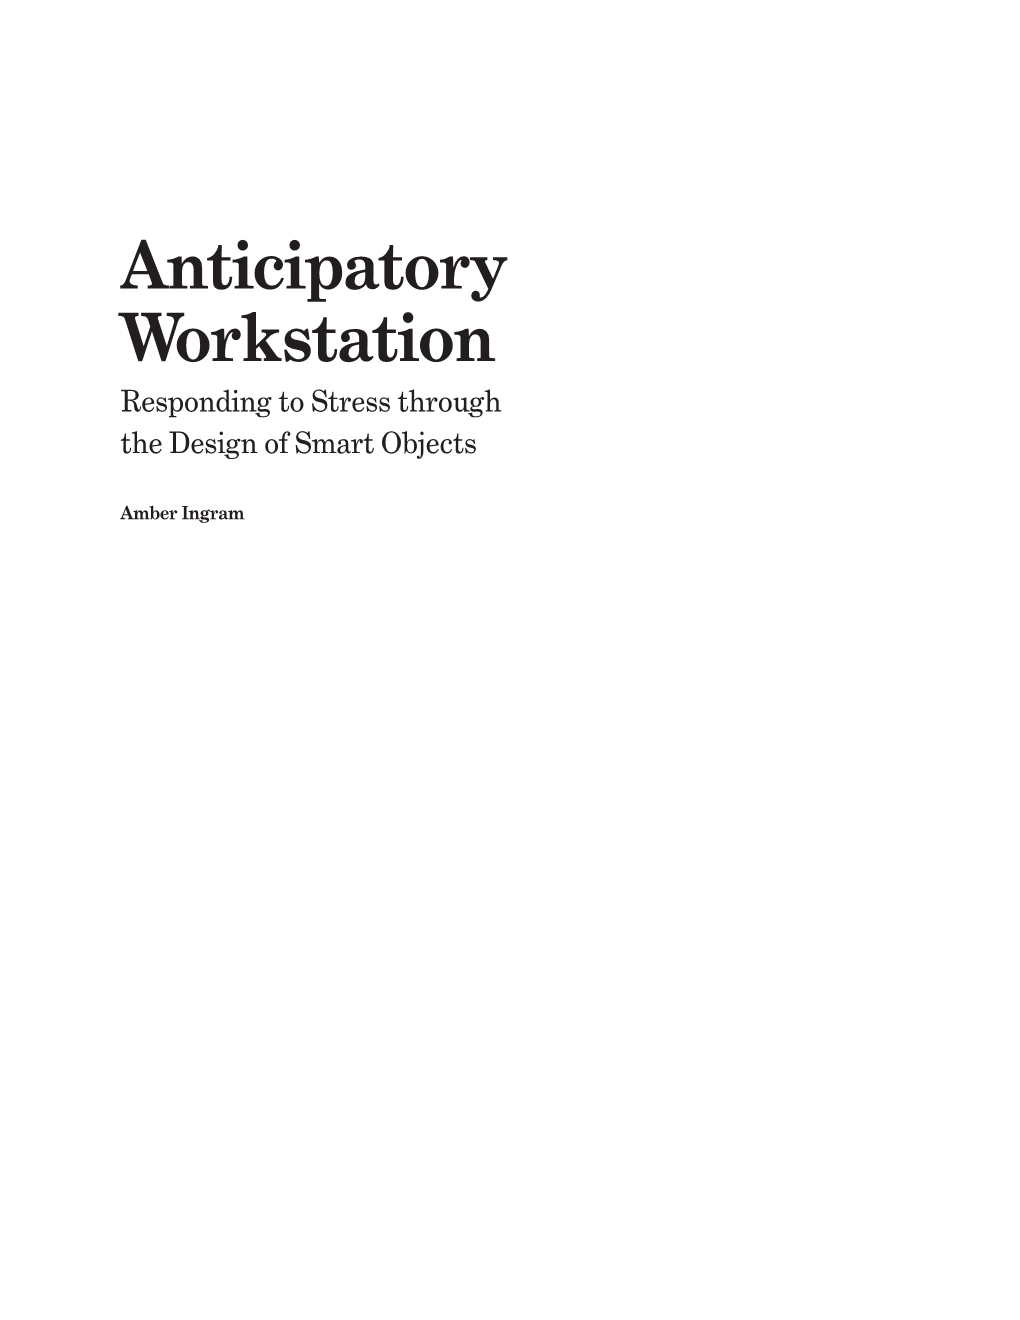 Anticipatory Workstation Responding to Stress Through the Design of Smart Objects